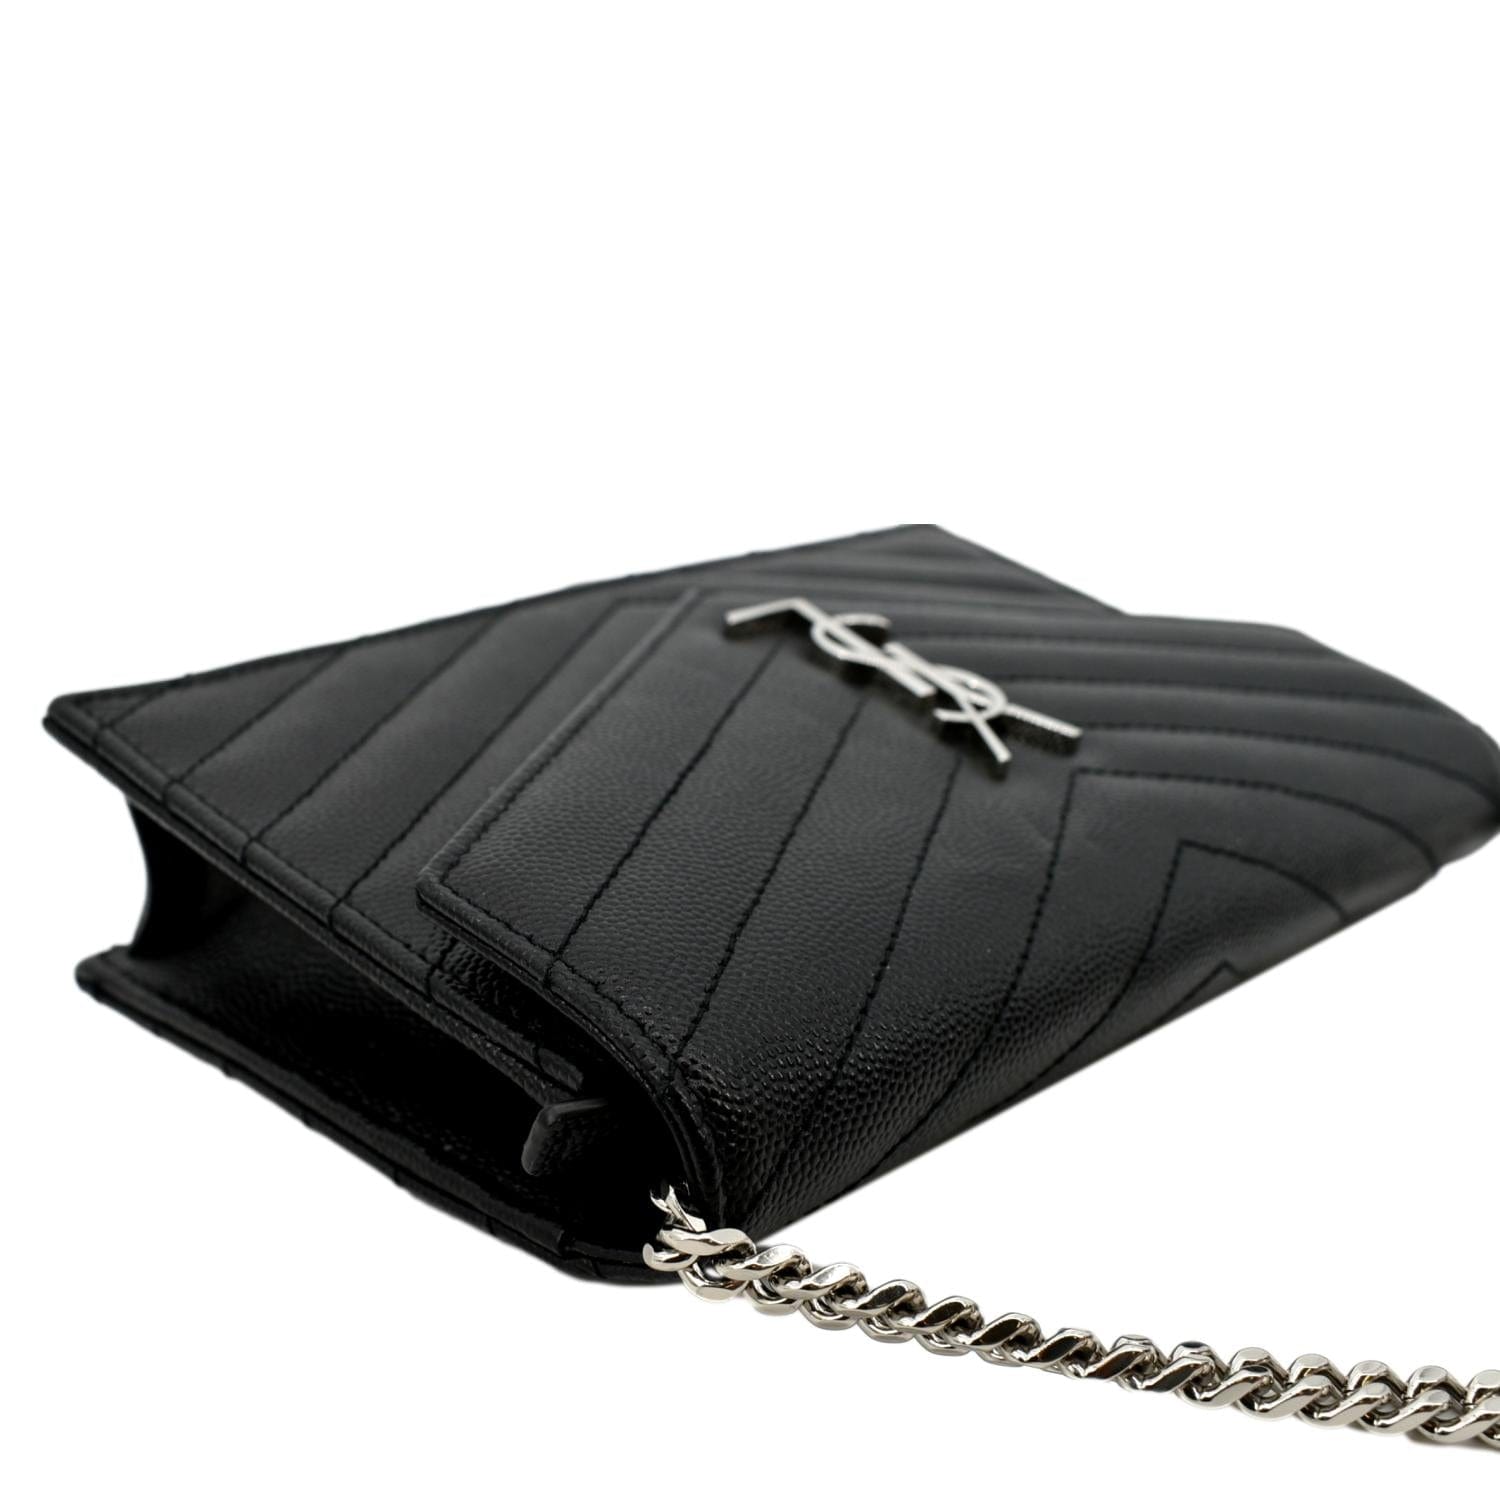 Yves Saint Laurent, Bags, Black Ysl Purse With Silver Chain